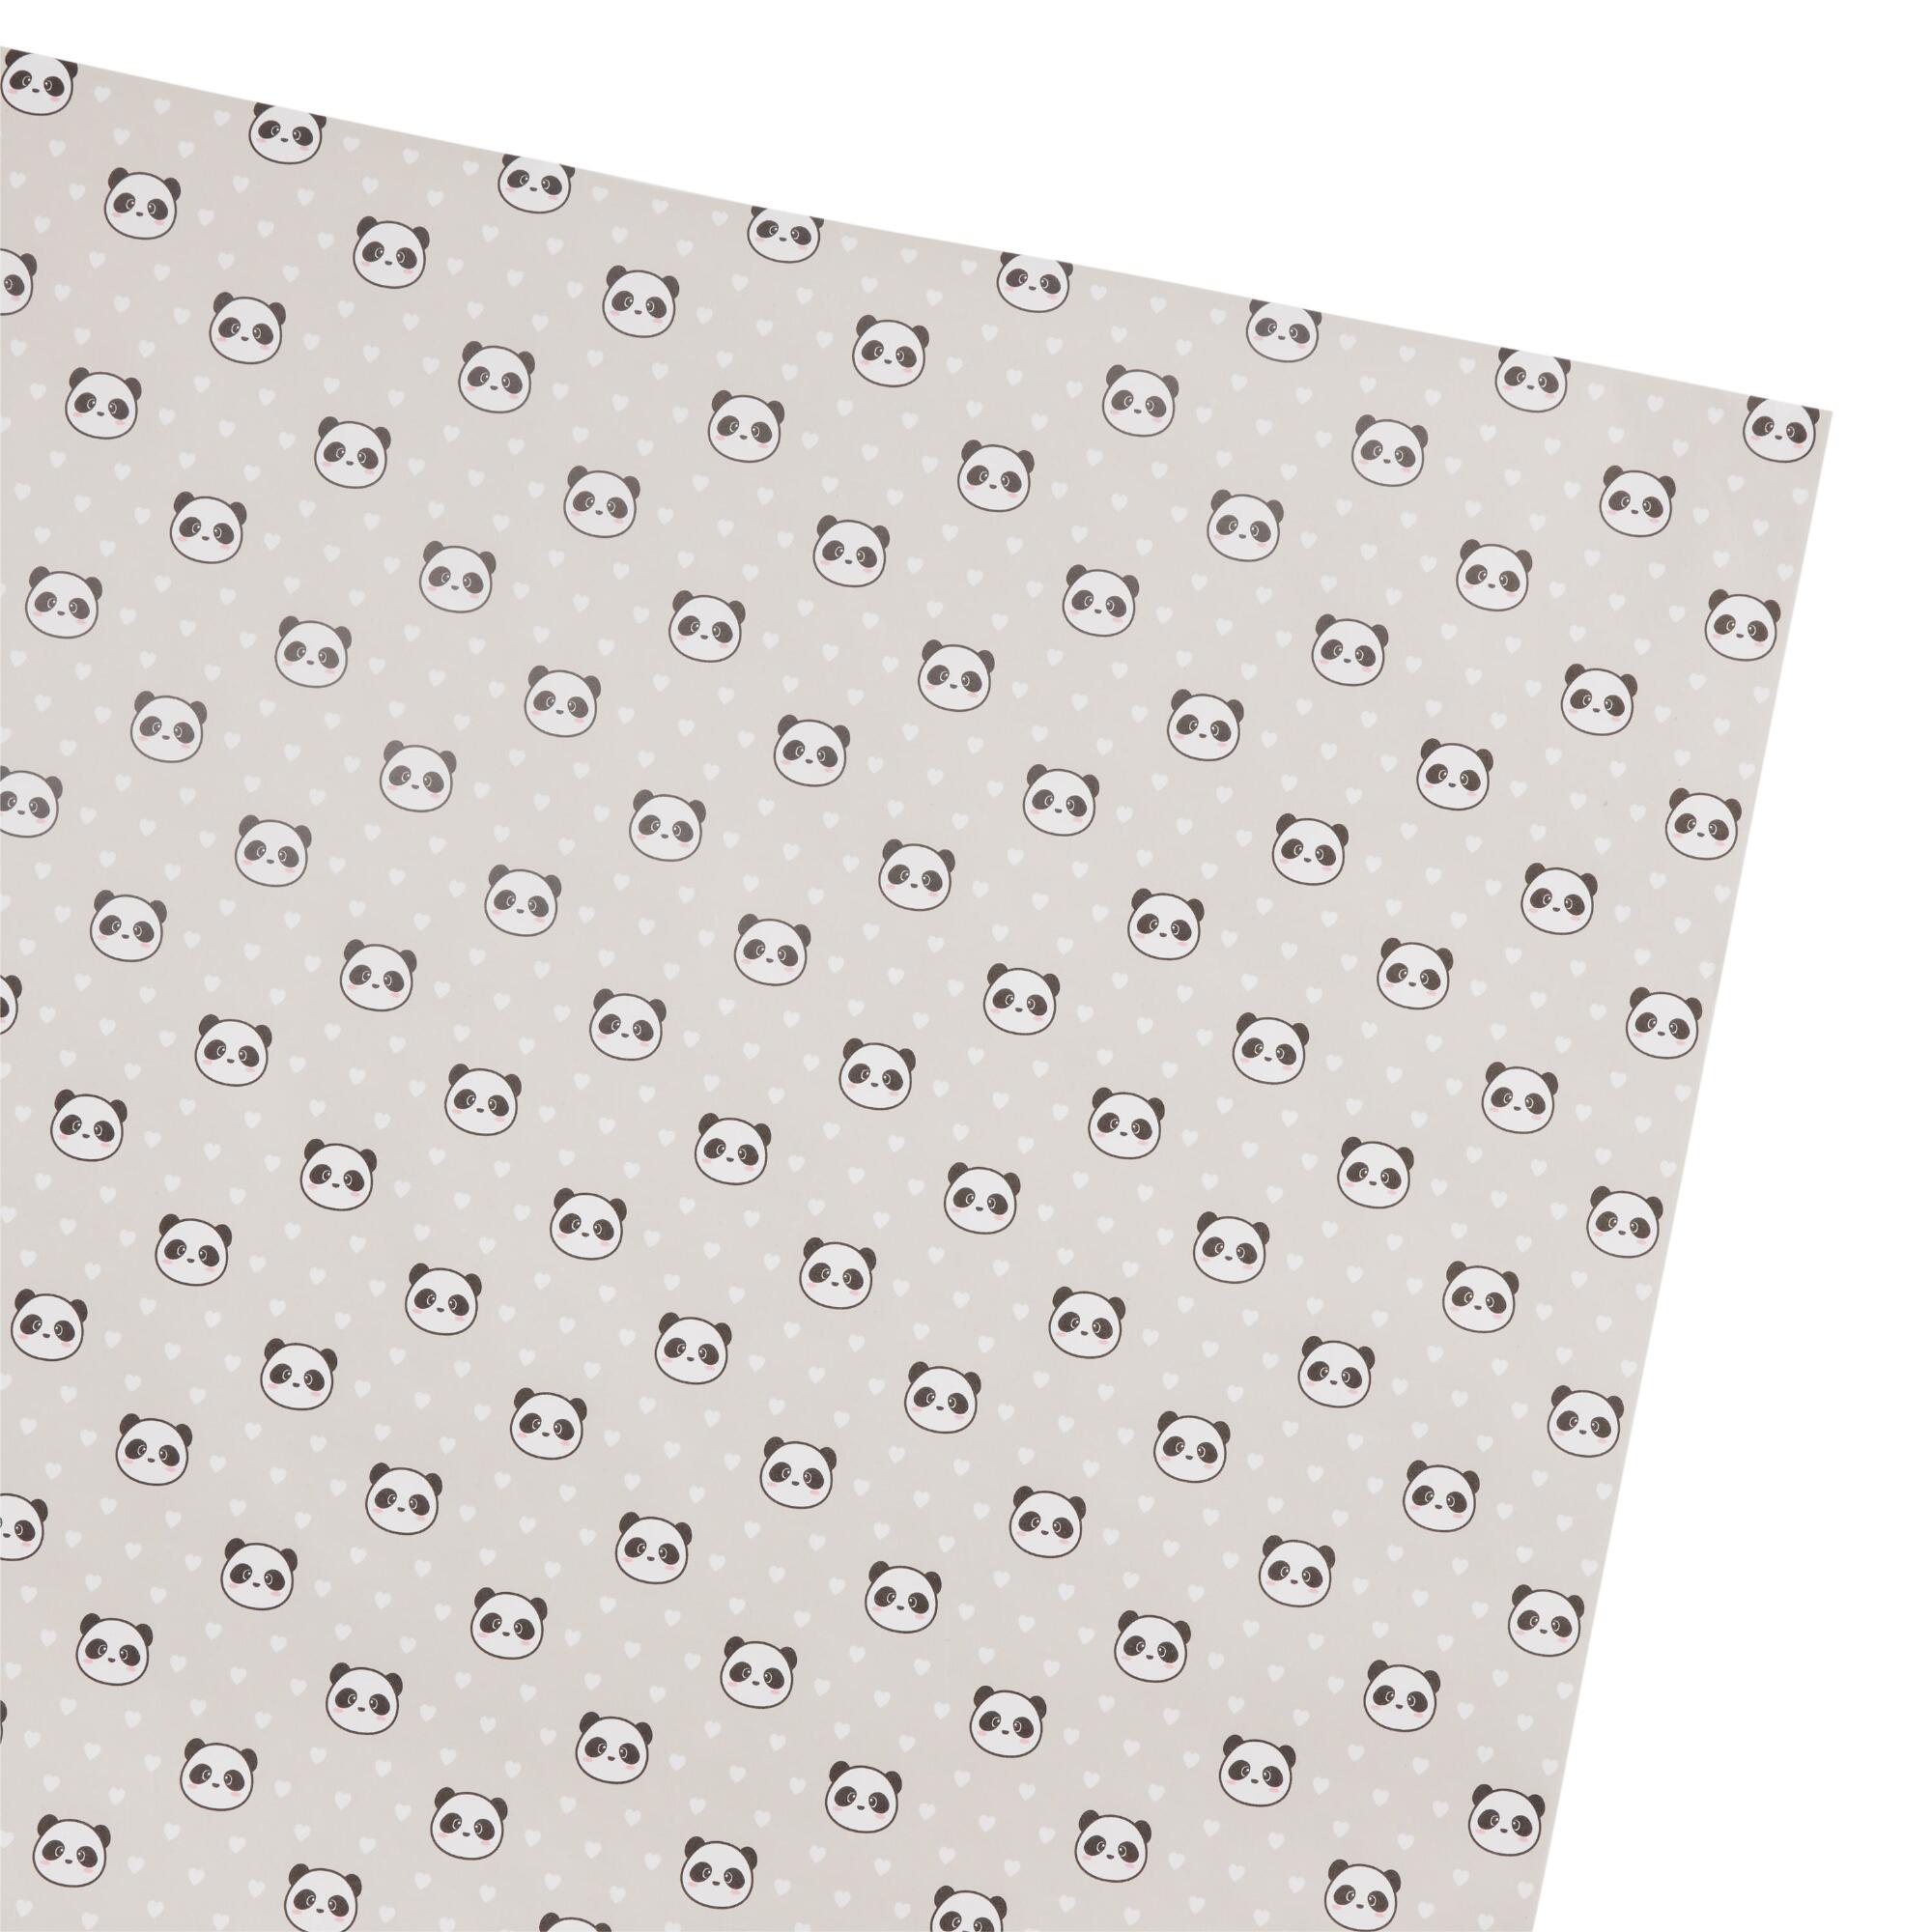 Panda Hearts Wrapping Paper Roll: Multi/Natural by World Market